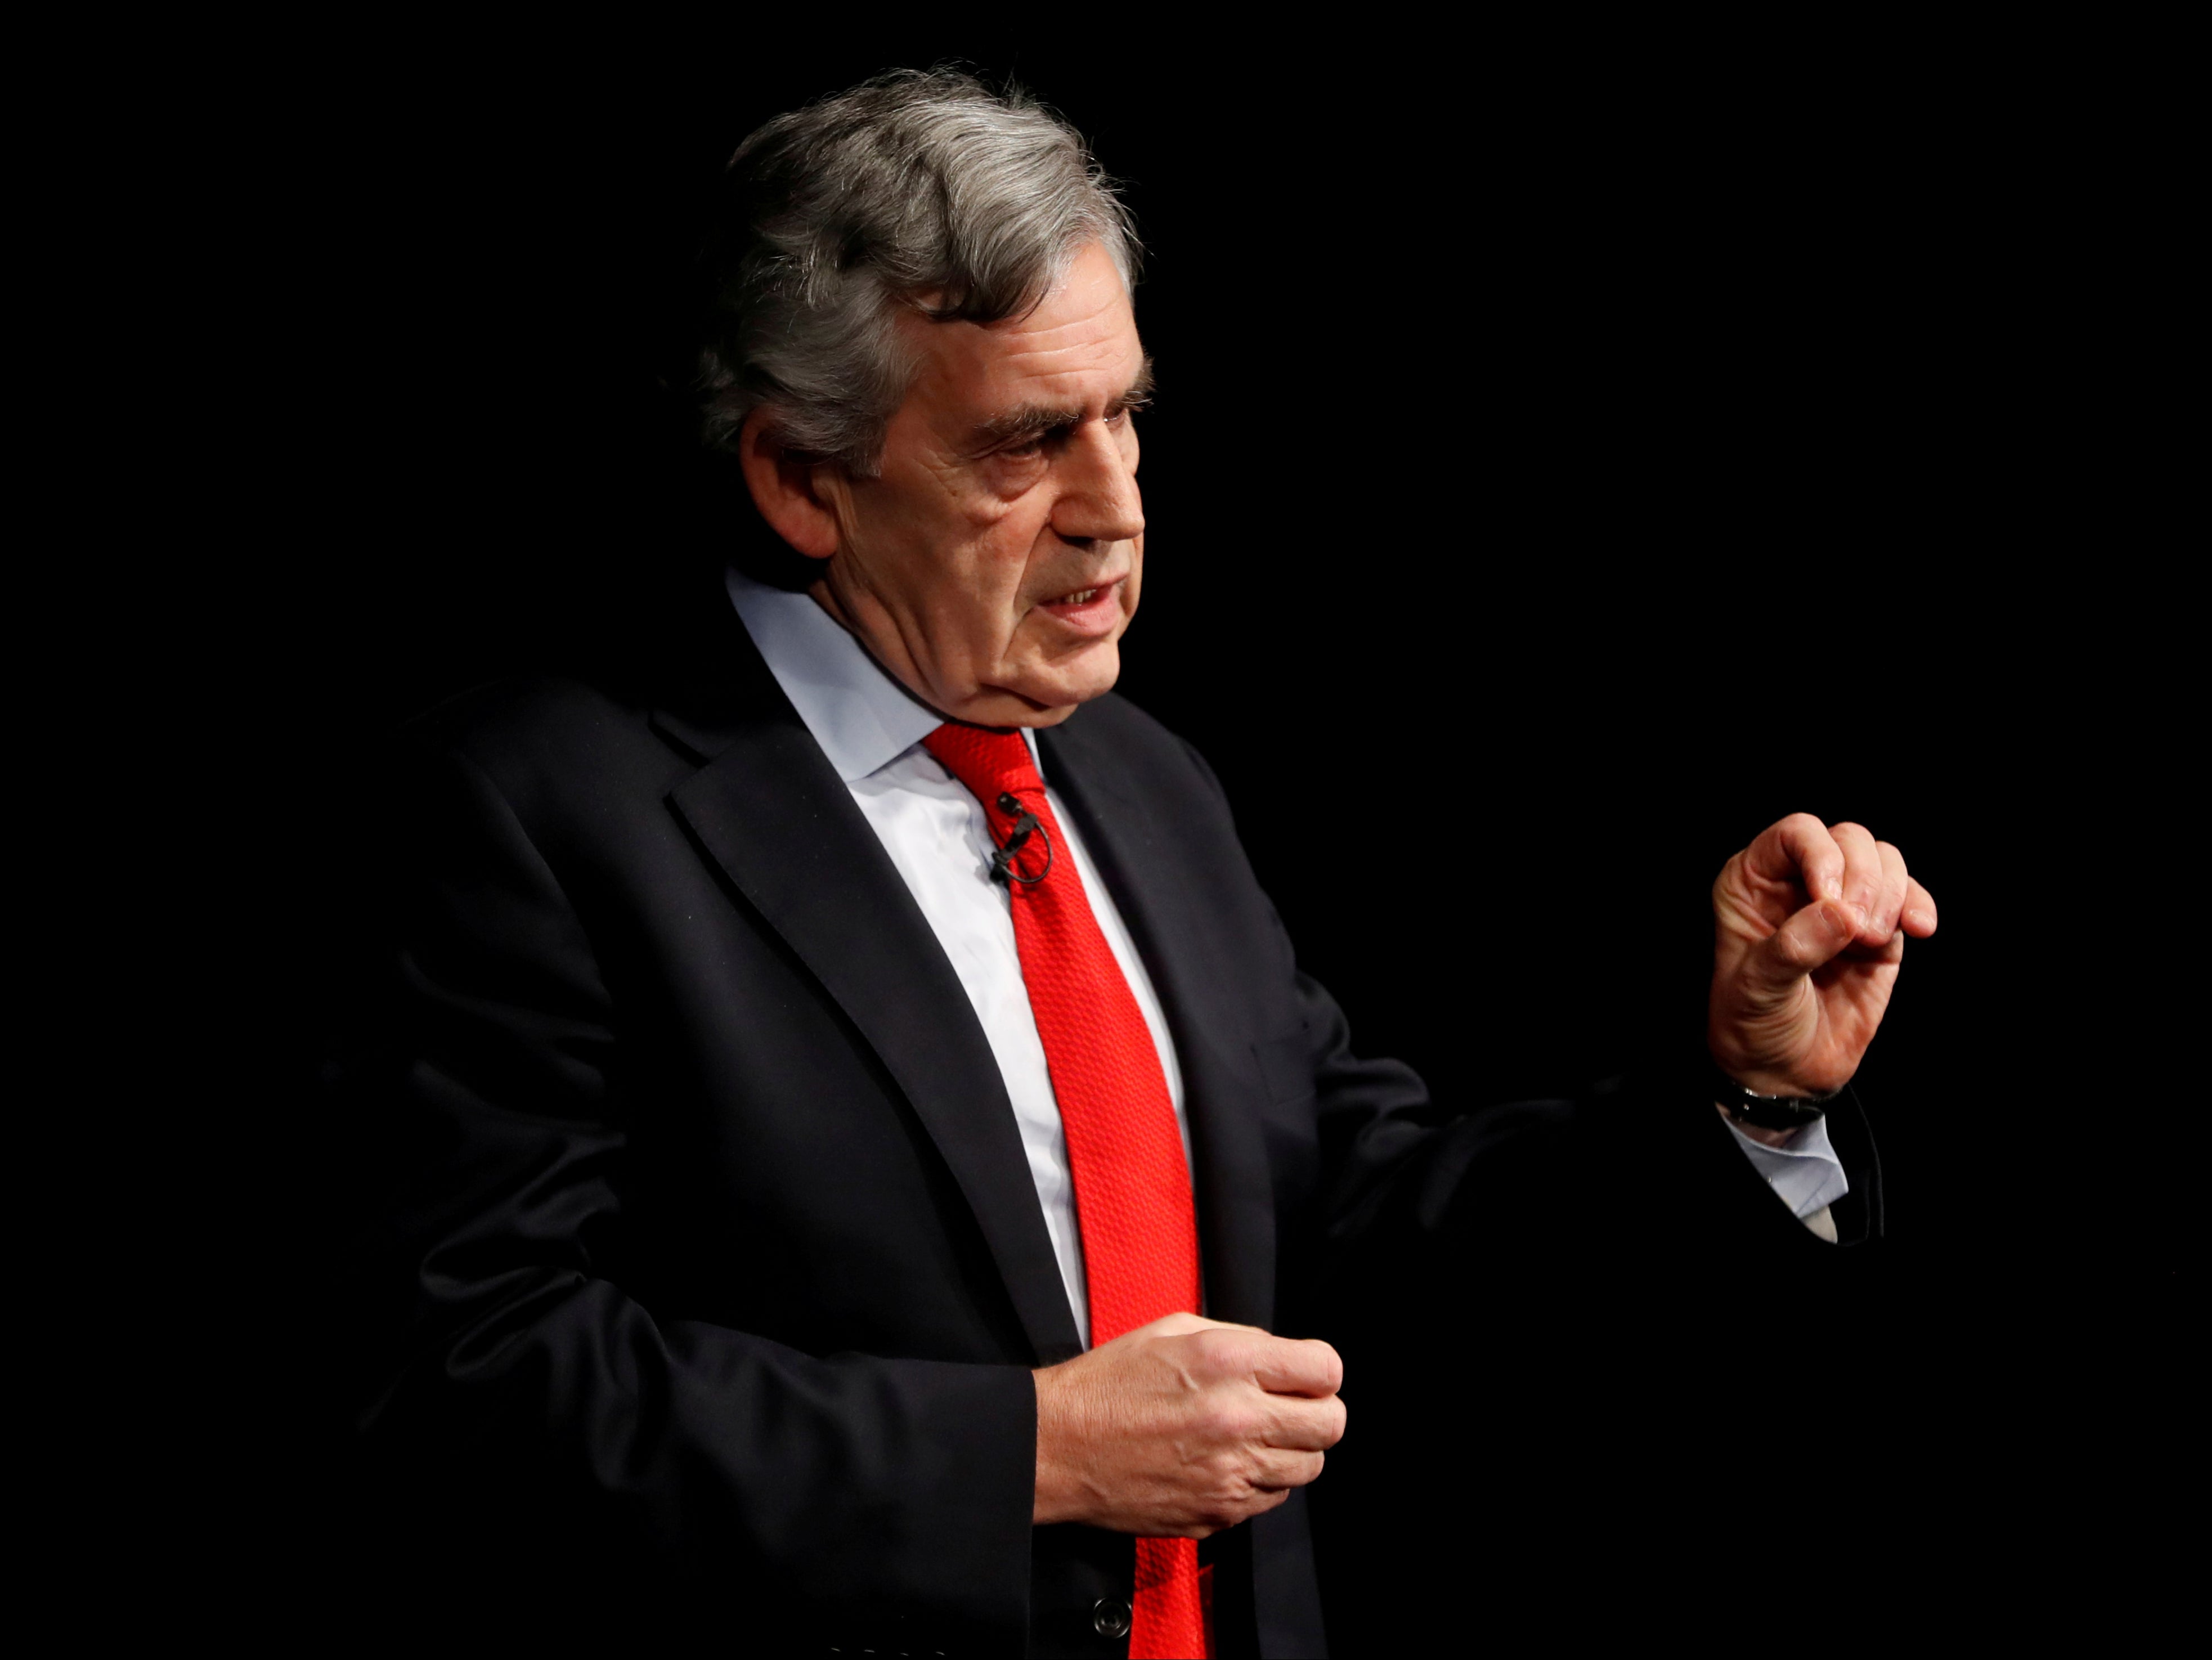 Gordon Brown called the reduction ‘morally indefensible’.